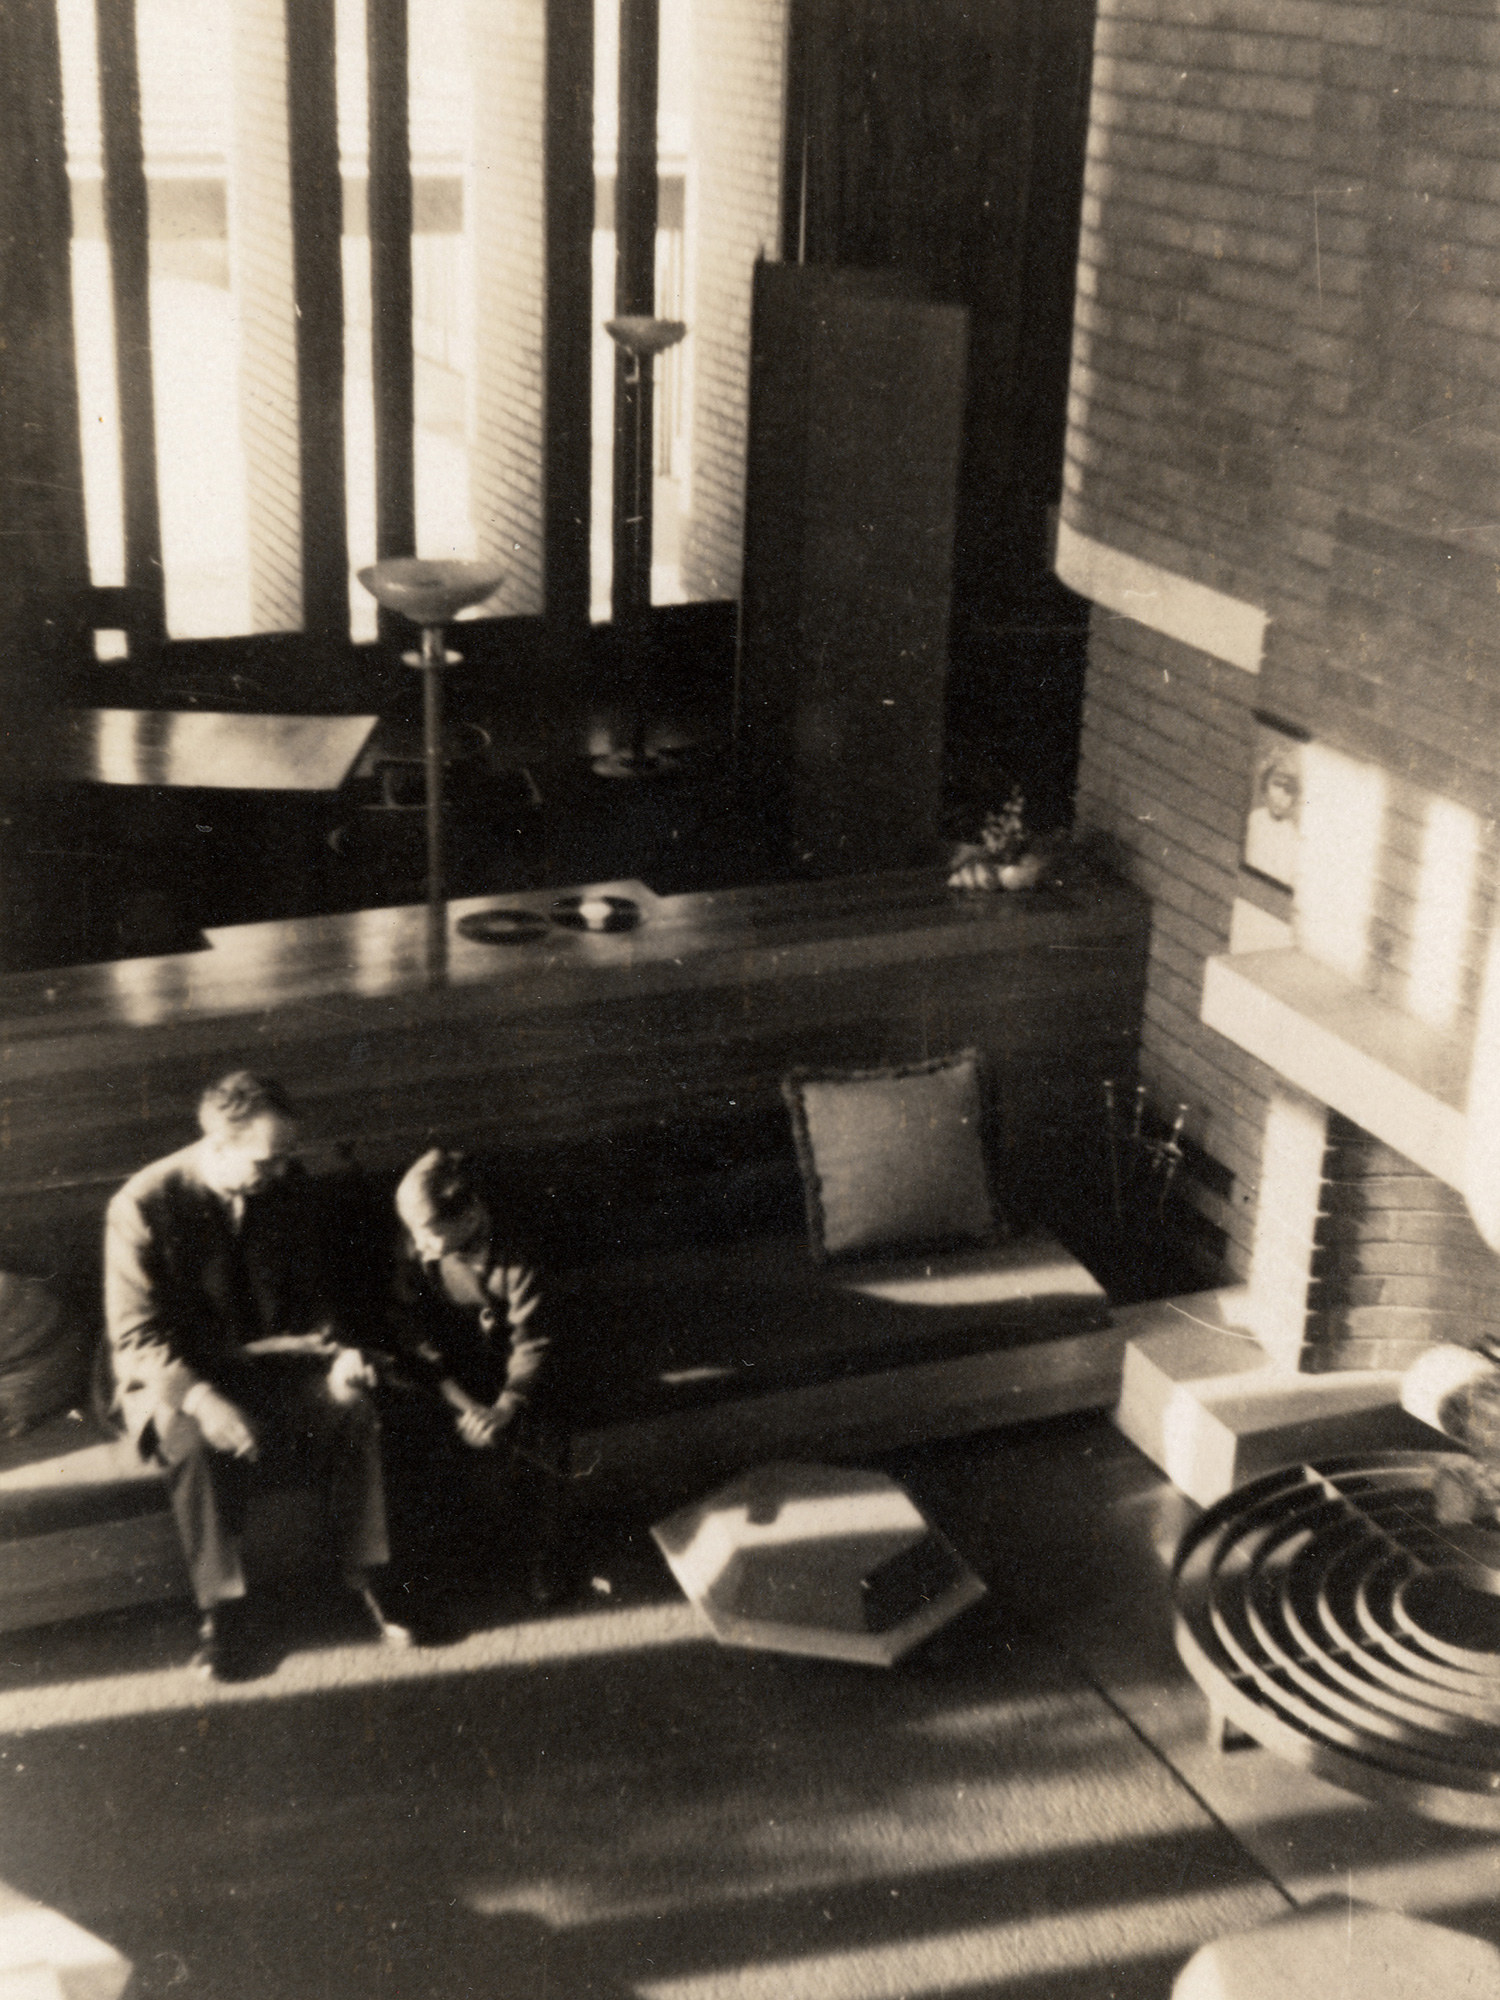 H.F Johnson Jr. and Frank Lloyd Wright at “Wingspread” house